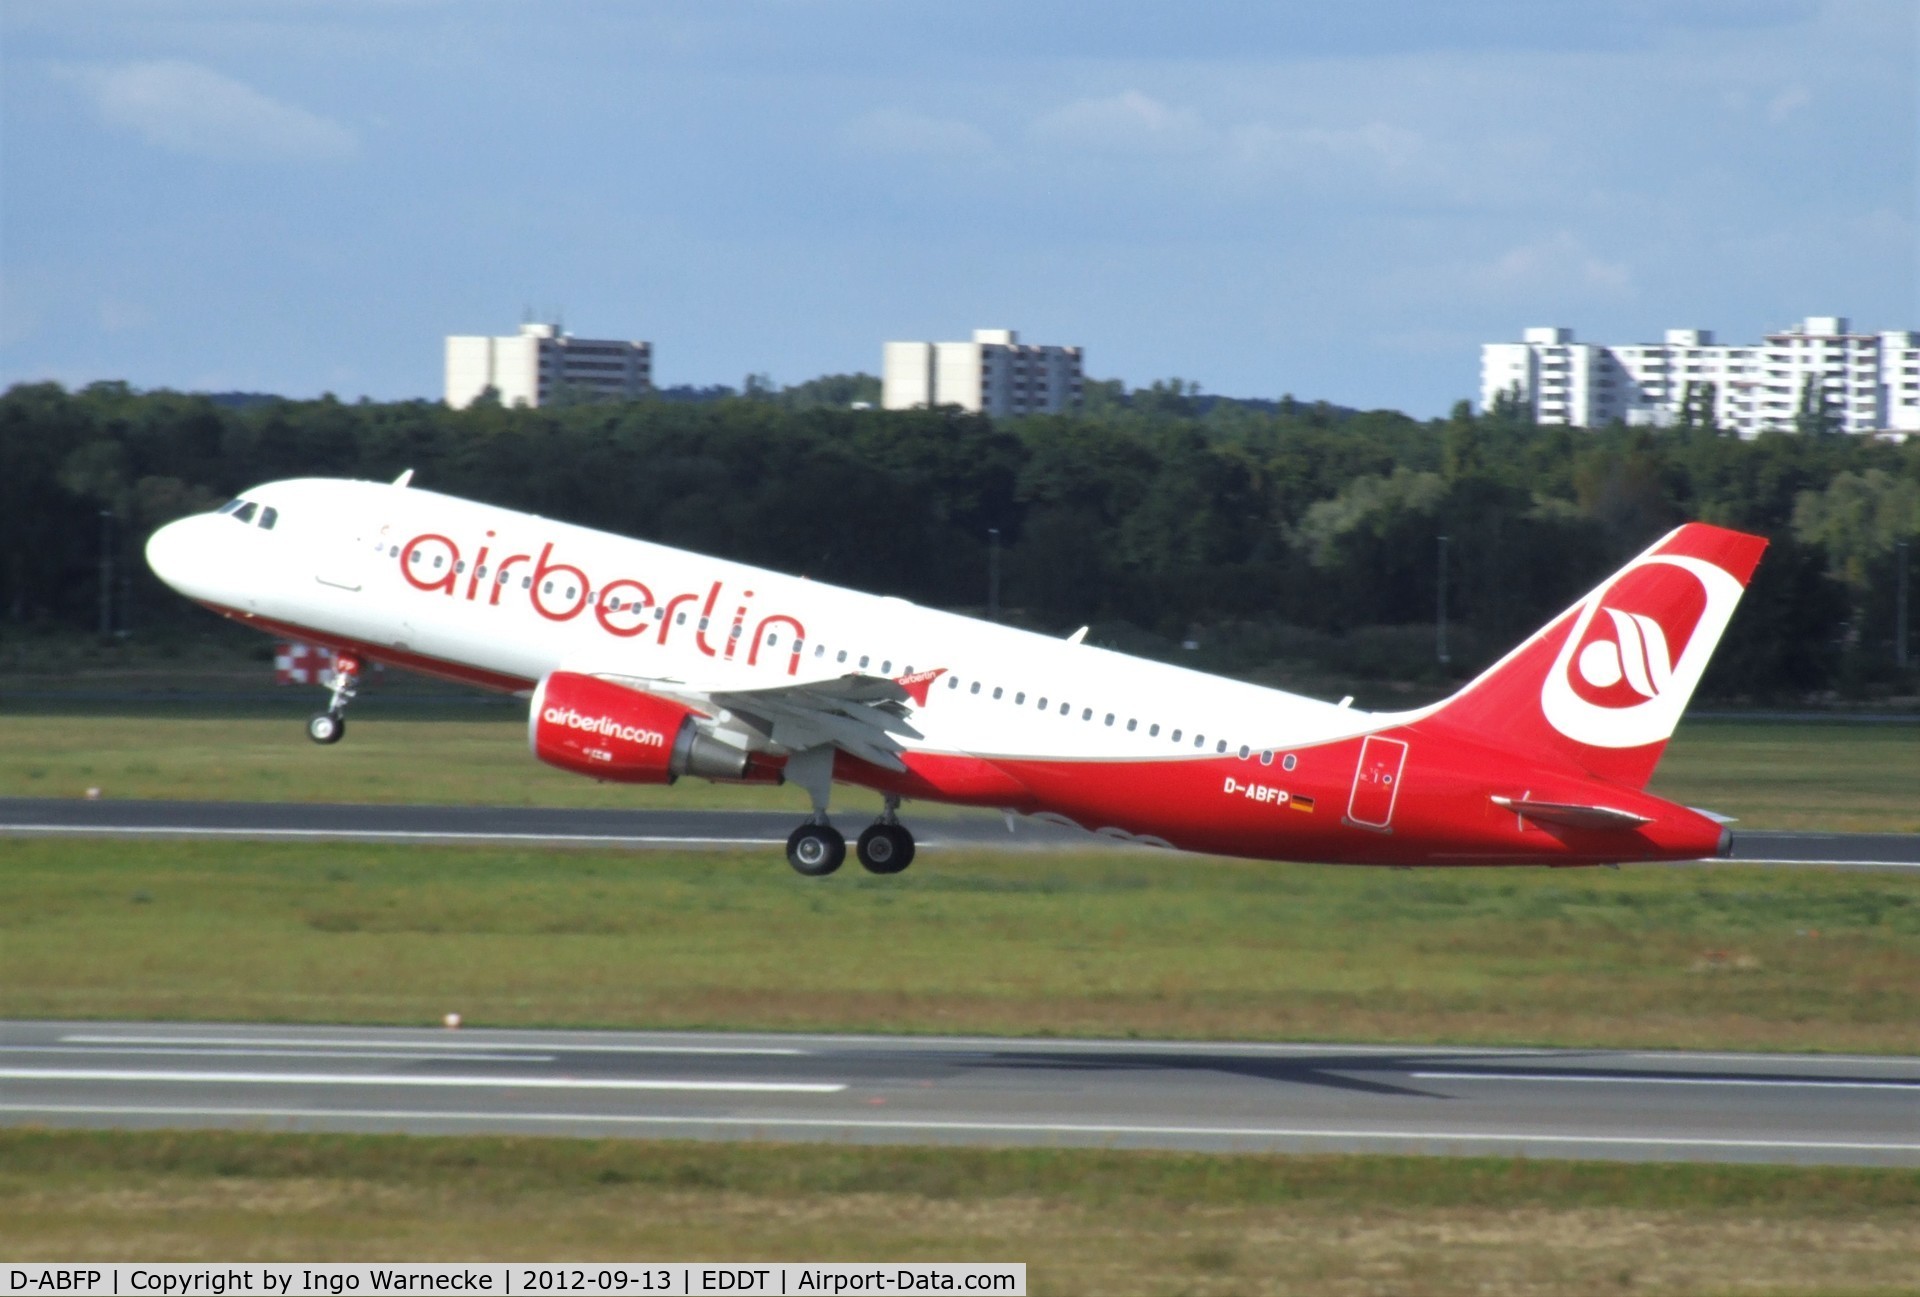 D-ABFP, 2011 Airbus A320-214 C/N 4606, Airbus A320-214 of airberlin at Berlin-Tegel airport